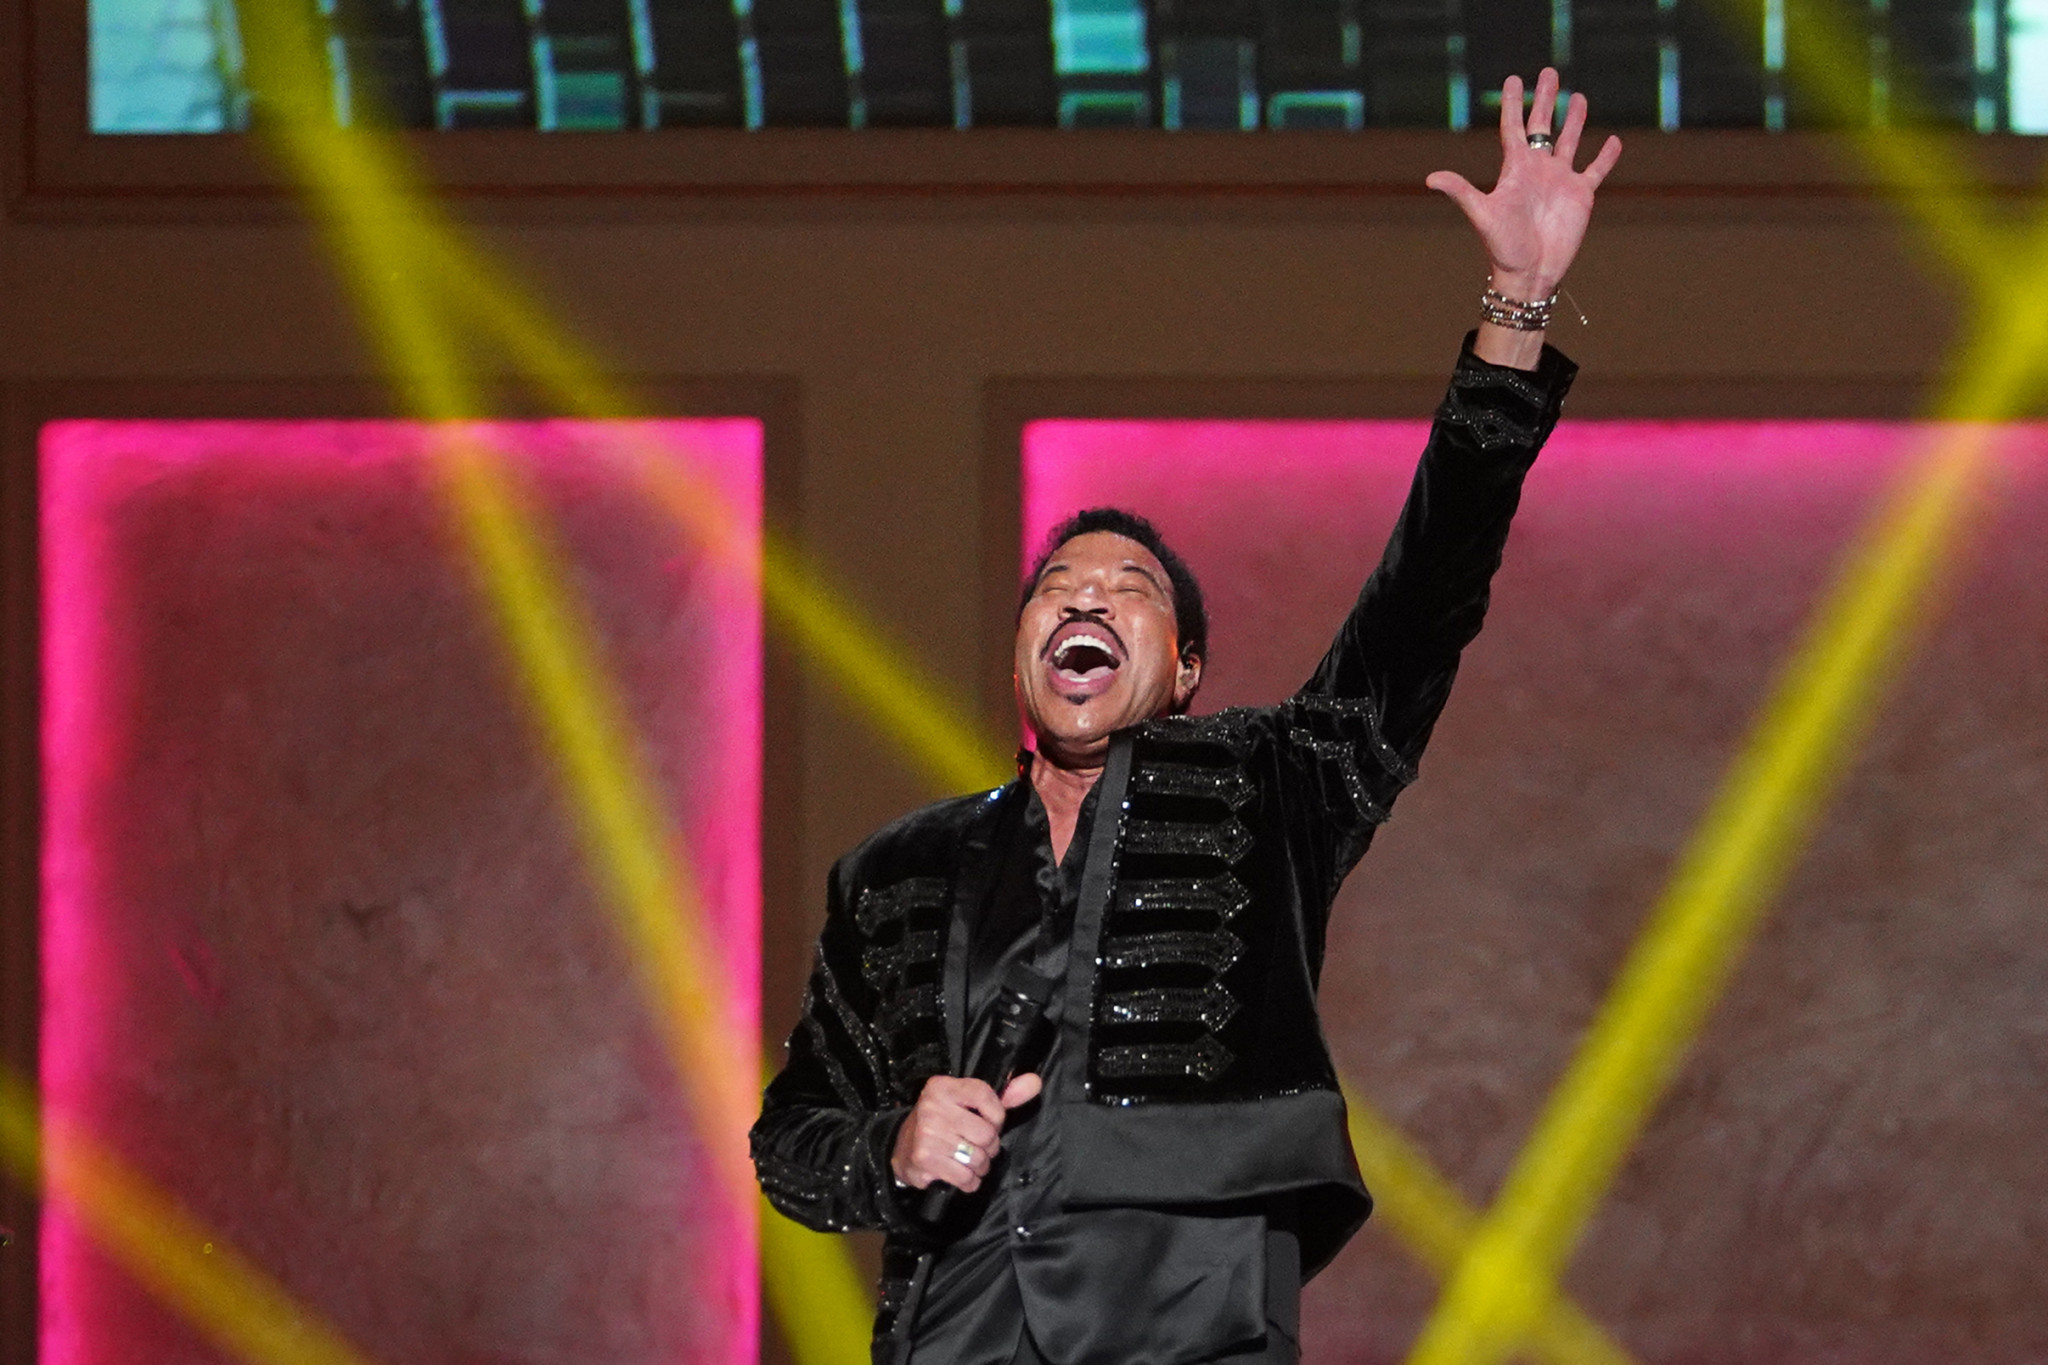 "Hello": Lionel Richie announced as featured performer at World Games 2022 Closing Ceremony